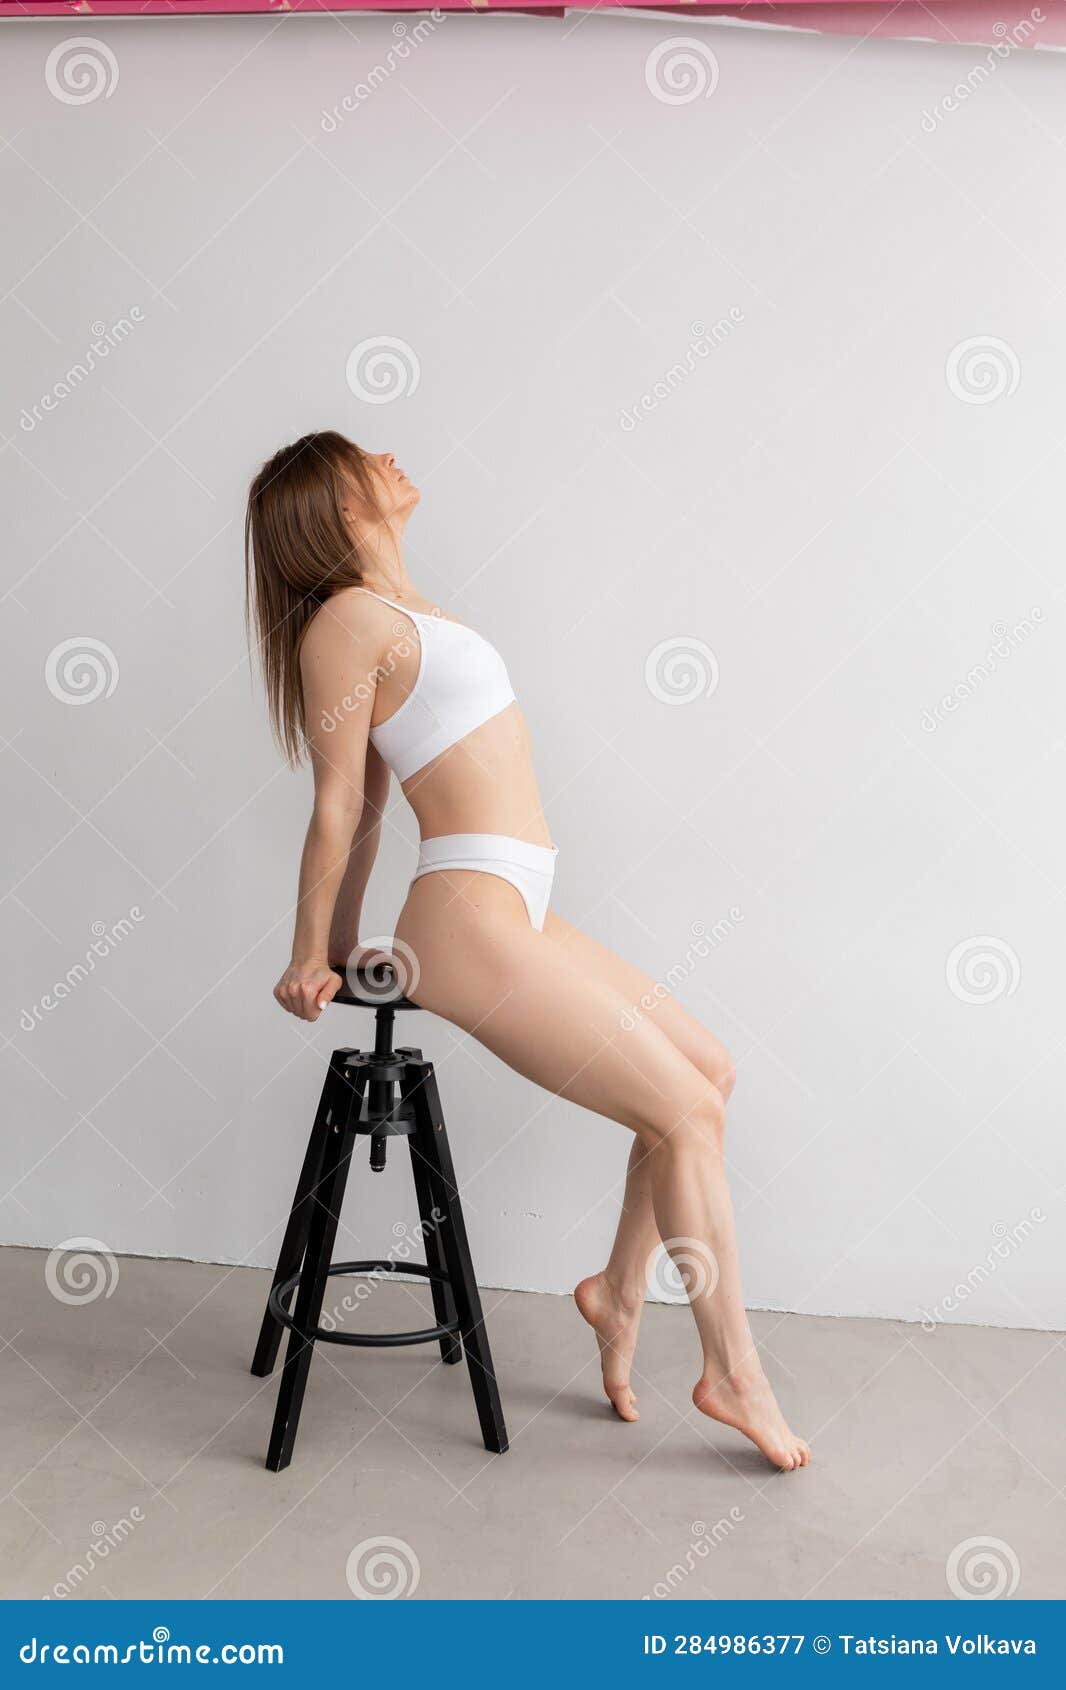 Side View of Young Beautiful Woman Wearing White Underwear Bra, Thongs,  Sitting on Black Stool, Holding Top of Stool. Stock Image - Image of  figure, attractive: 284986377